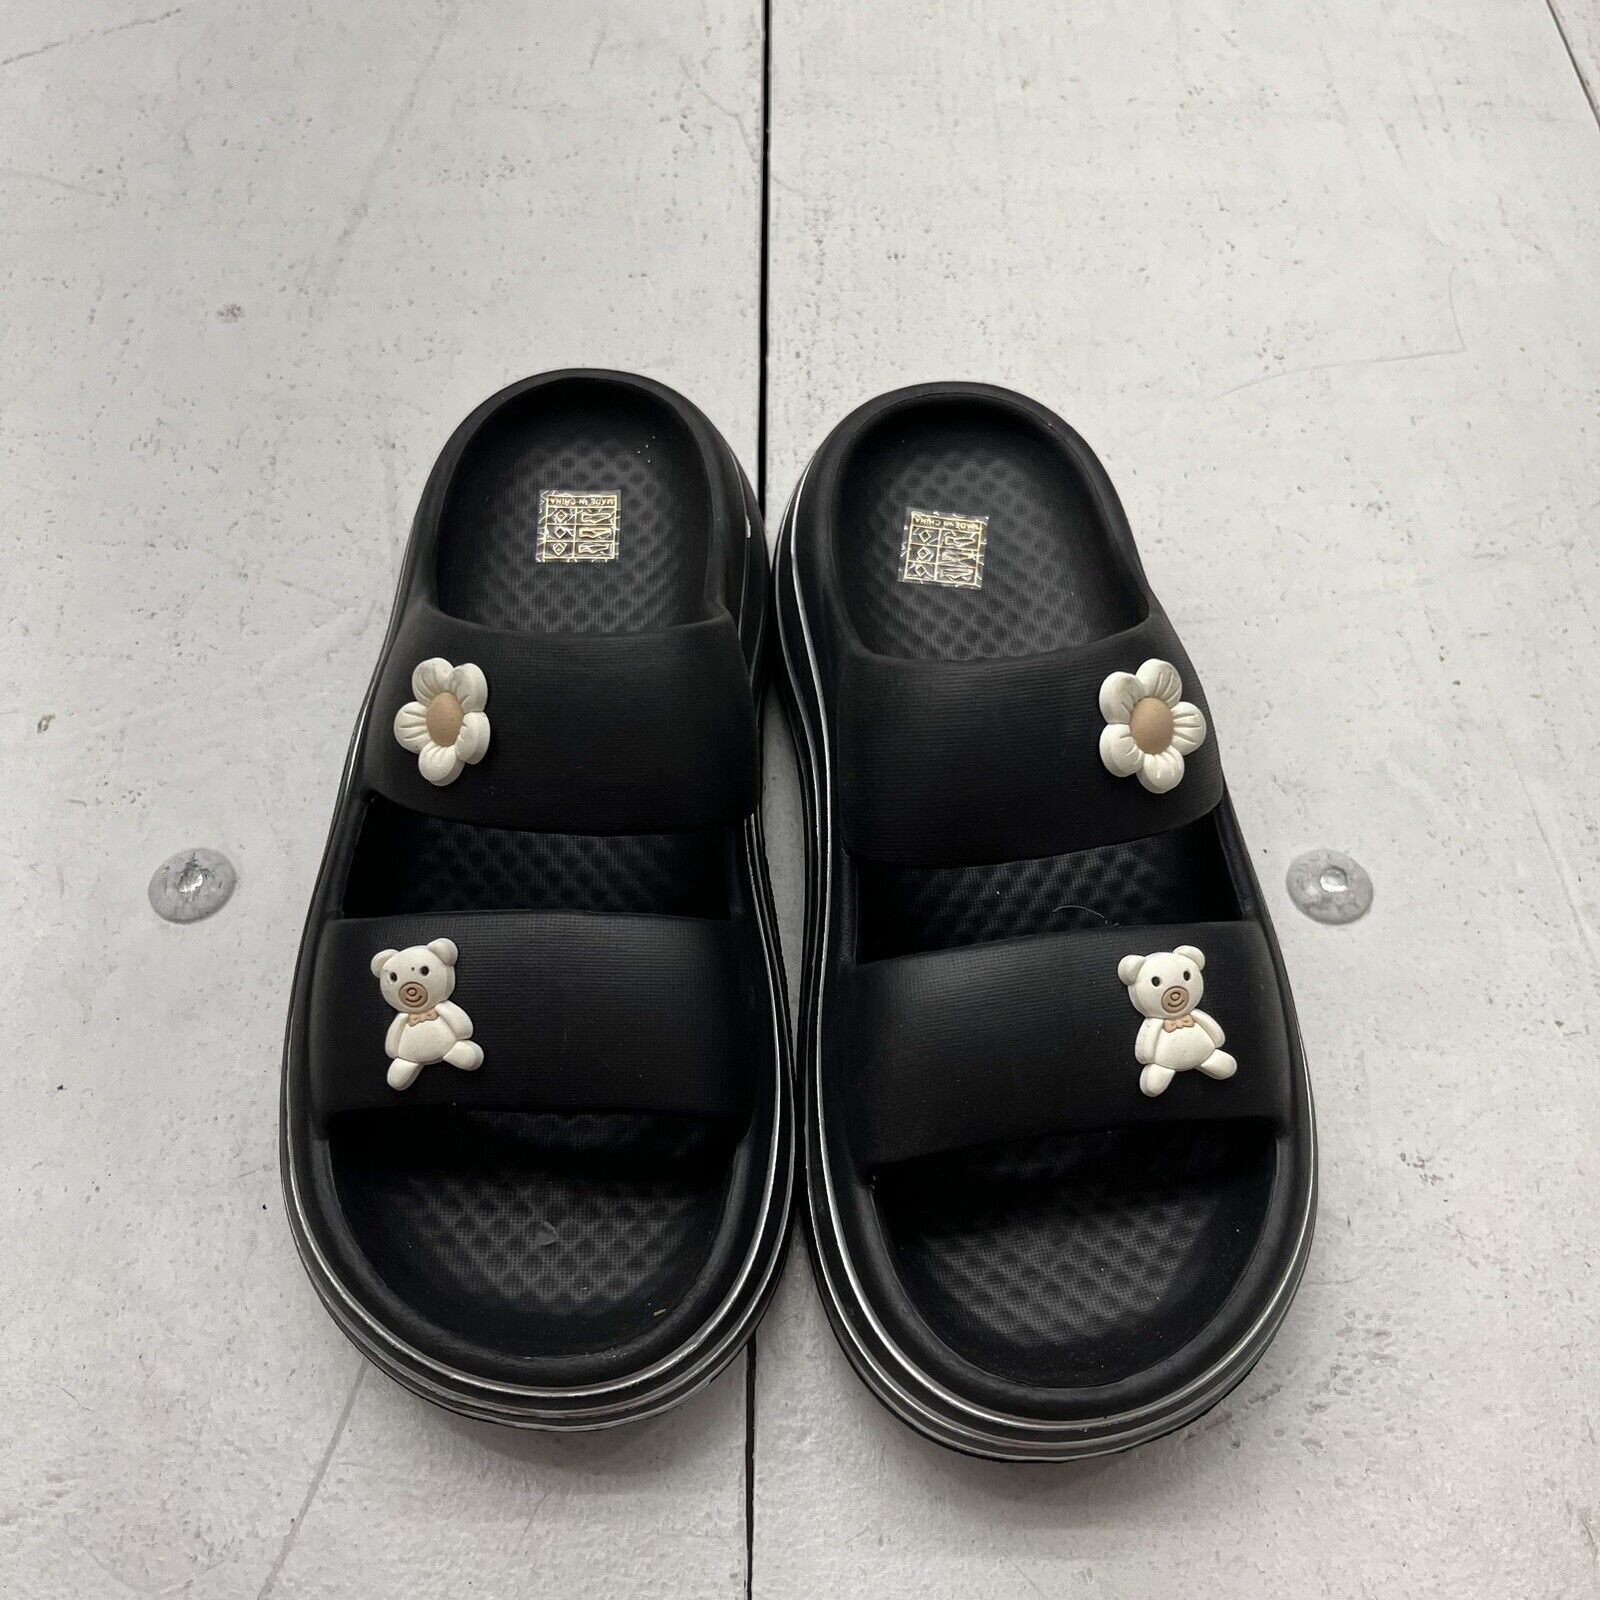 Black With Silver Trim Platform Slides With Charms Womens Size 7 NEW